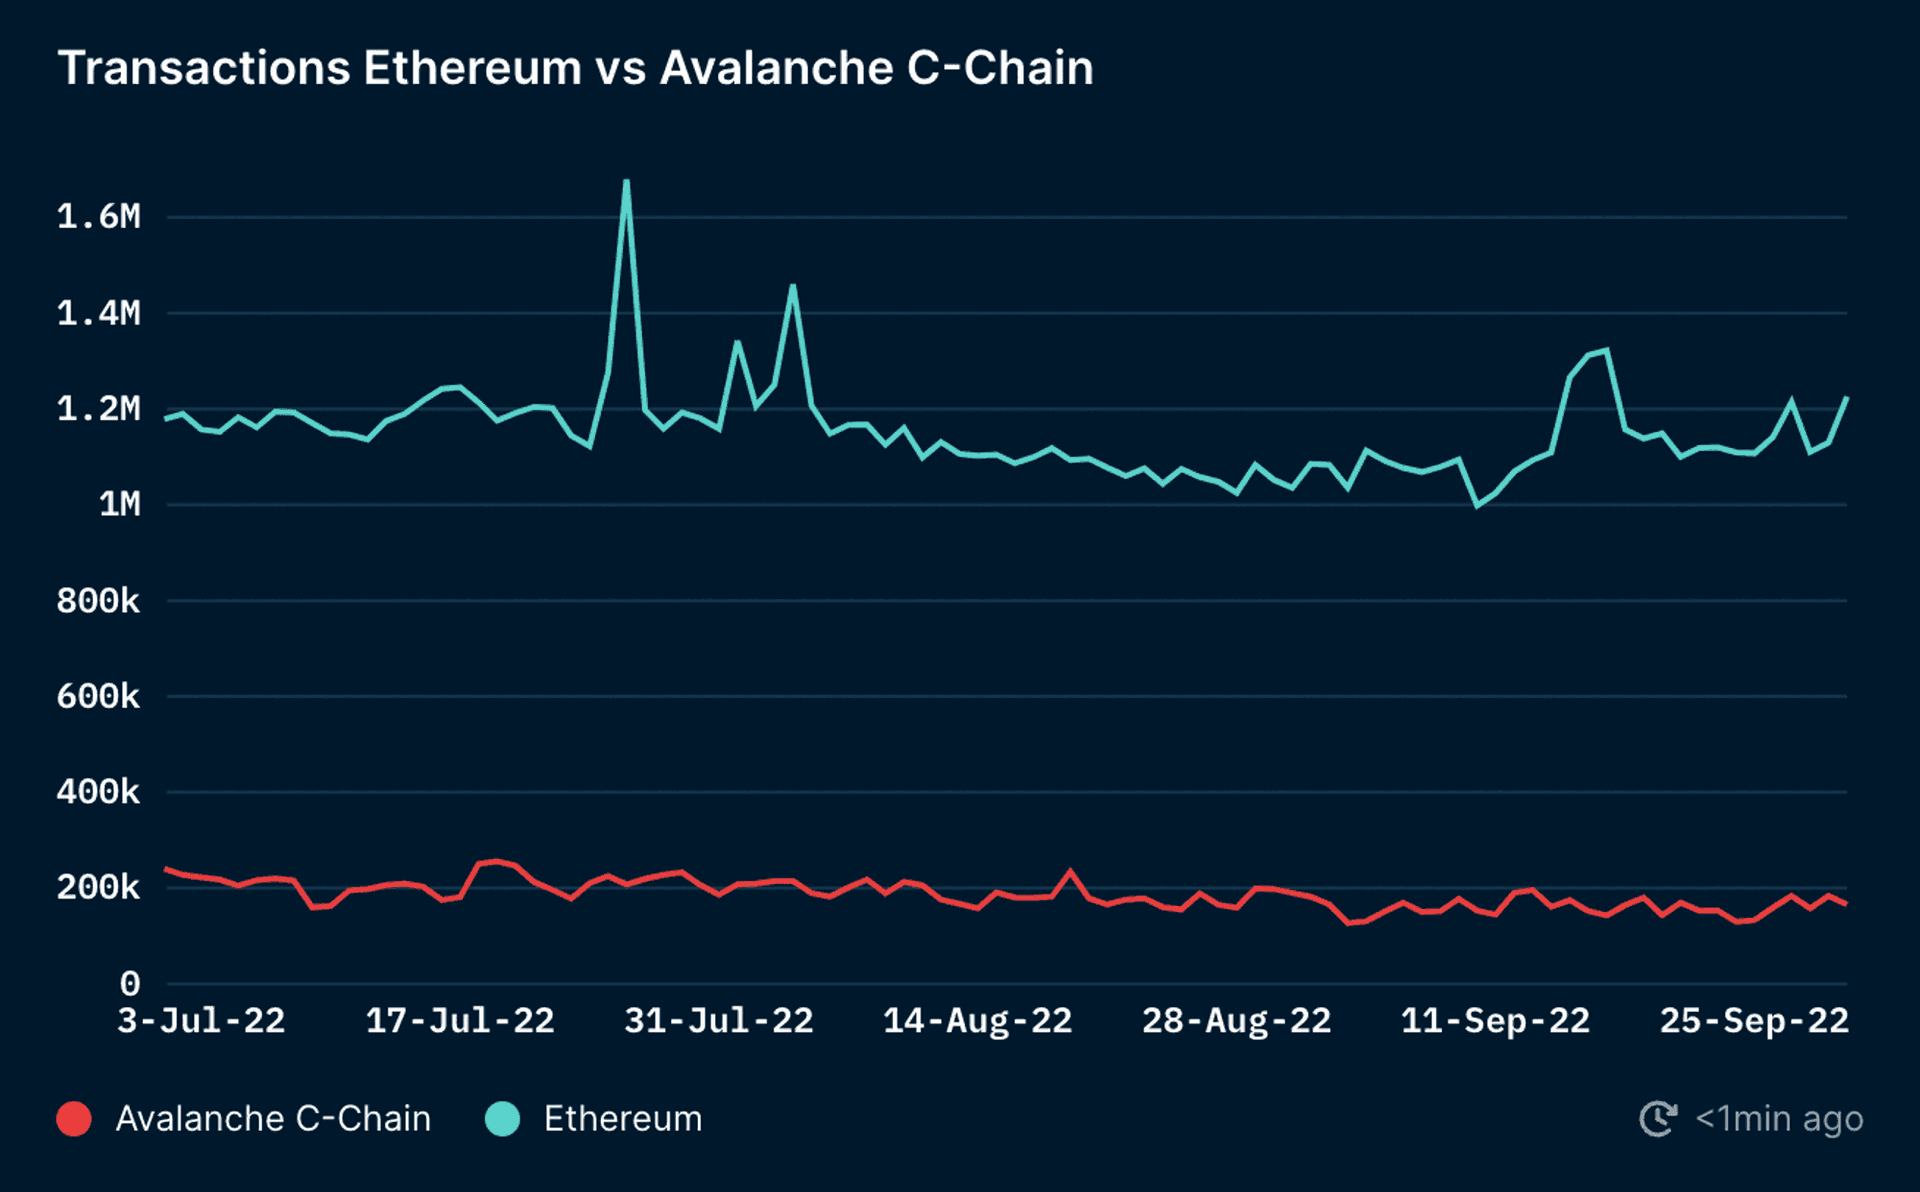 Daily Transactions on Ethereum vs Avalanche C-Chain